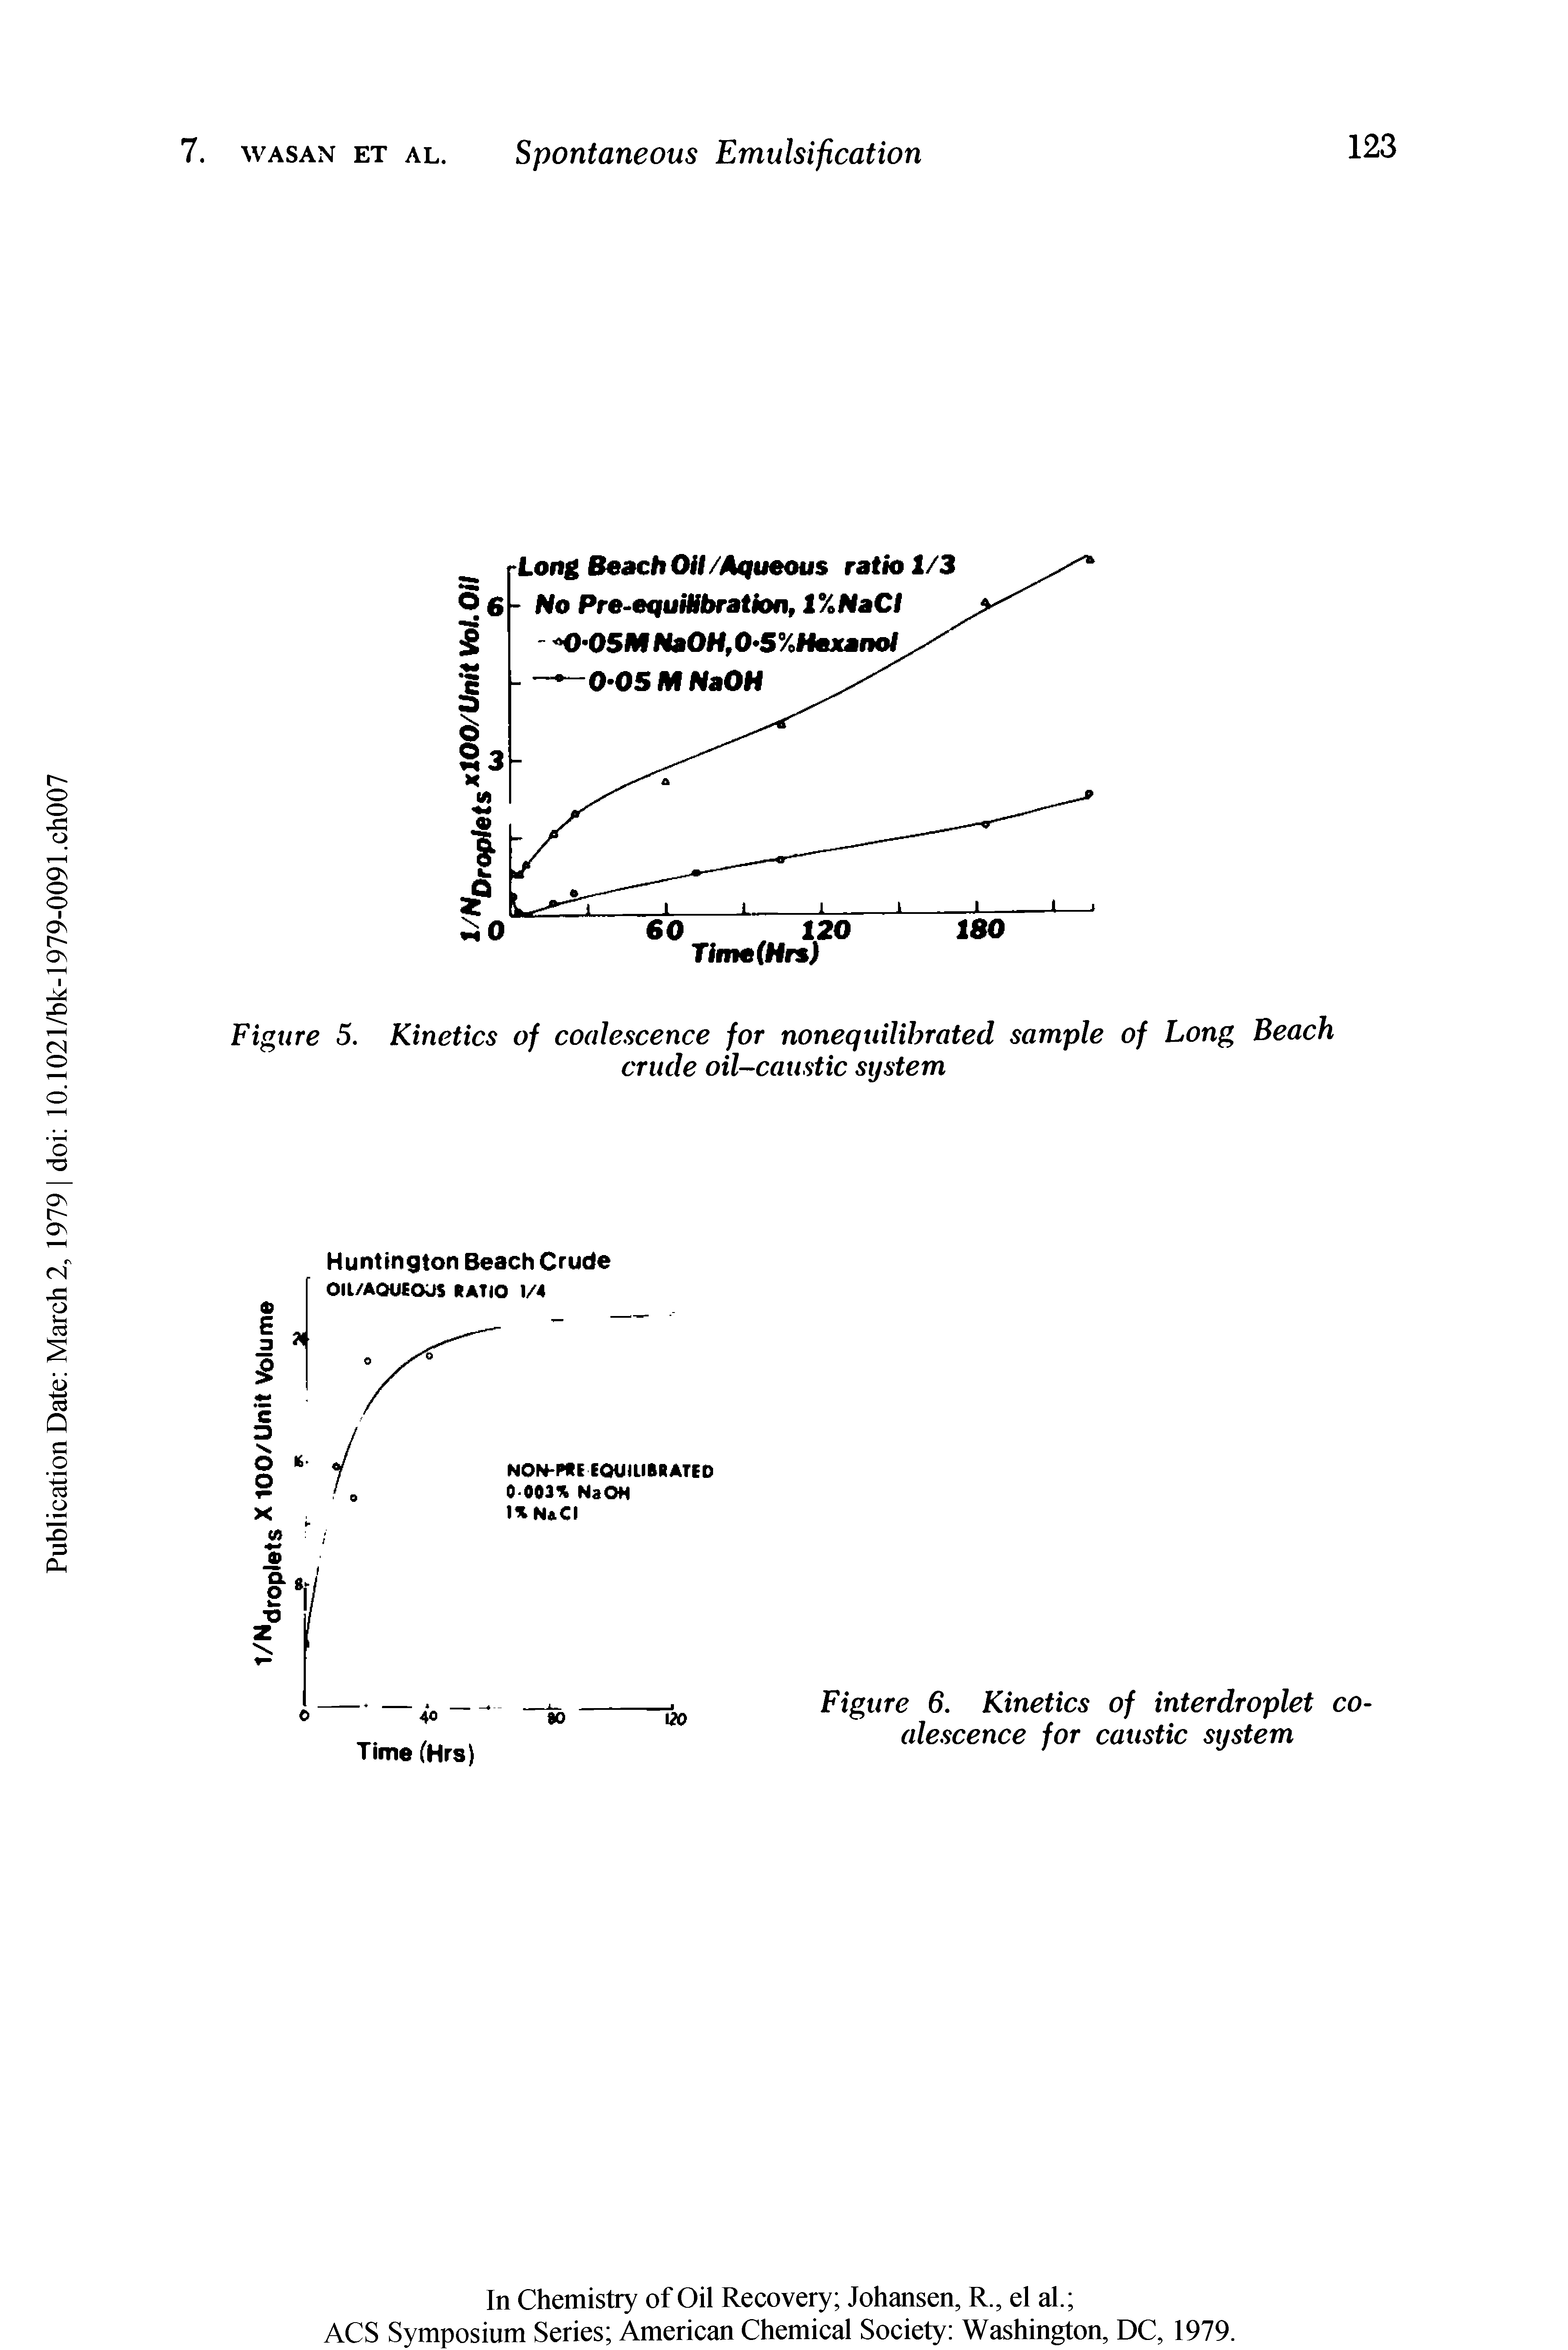 Figure 5. Kinetics of coalescence for nonequilihrated sample of Long Beach crude oil-caustic system...